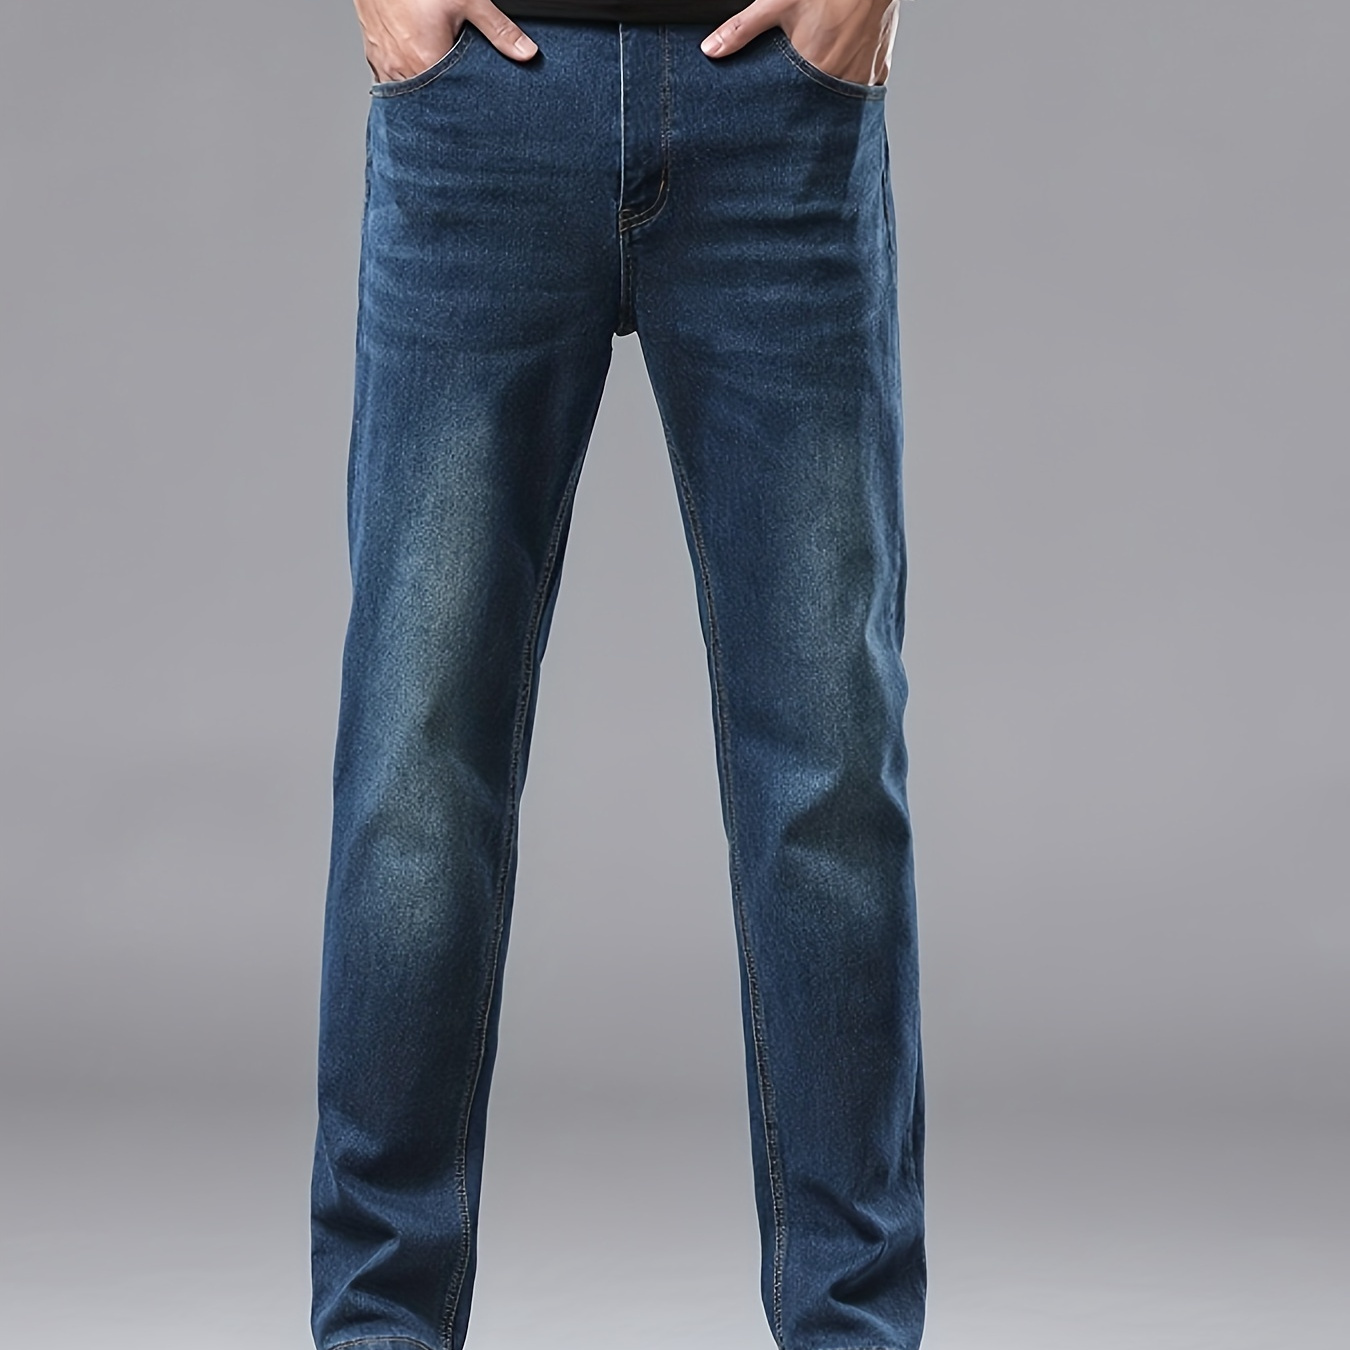 

Cotton Blend Men's Retro Casual Cropped Washed Denim Jeans With Pockets For Spring Summer Outdoor